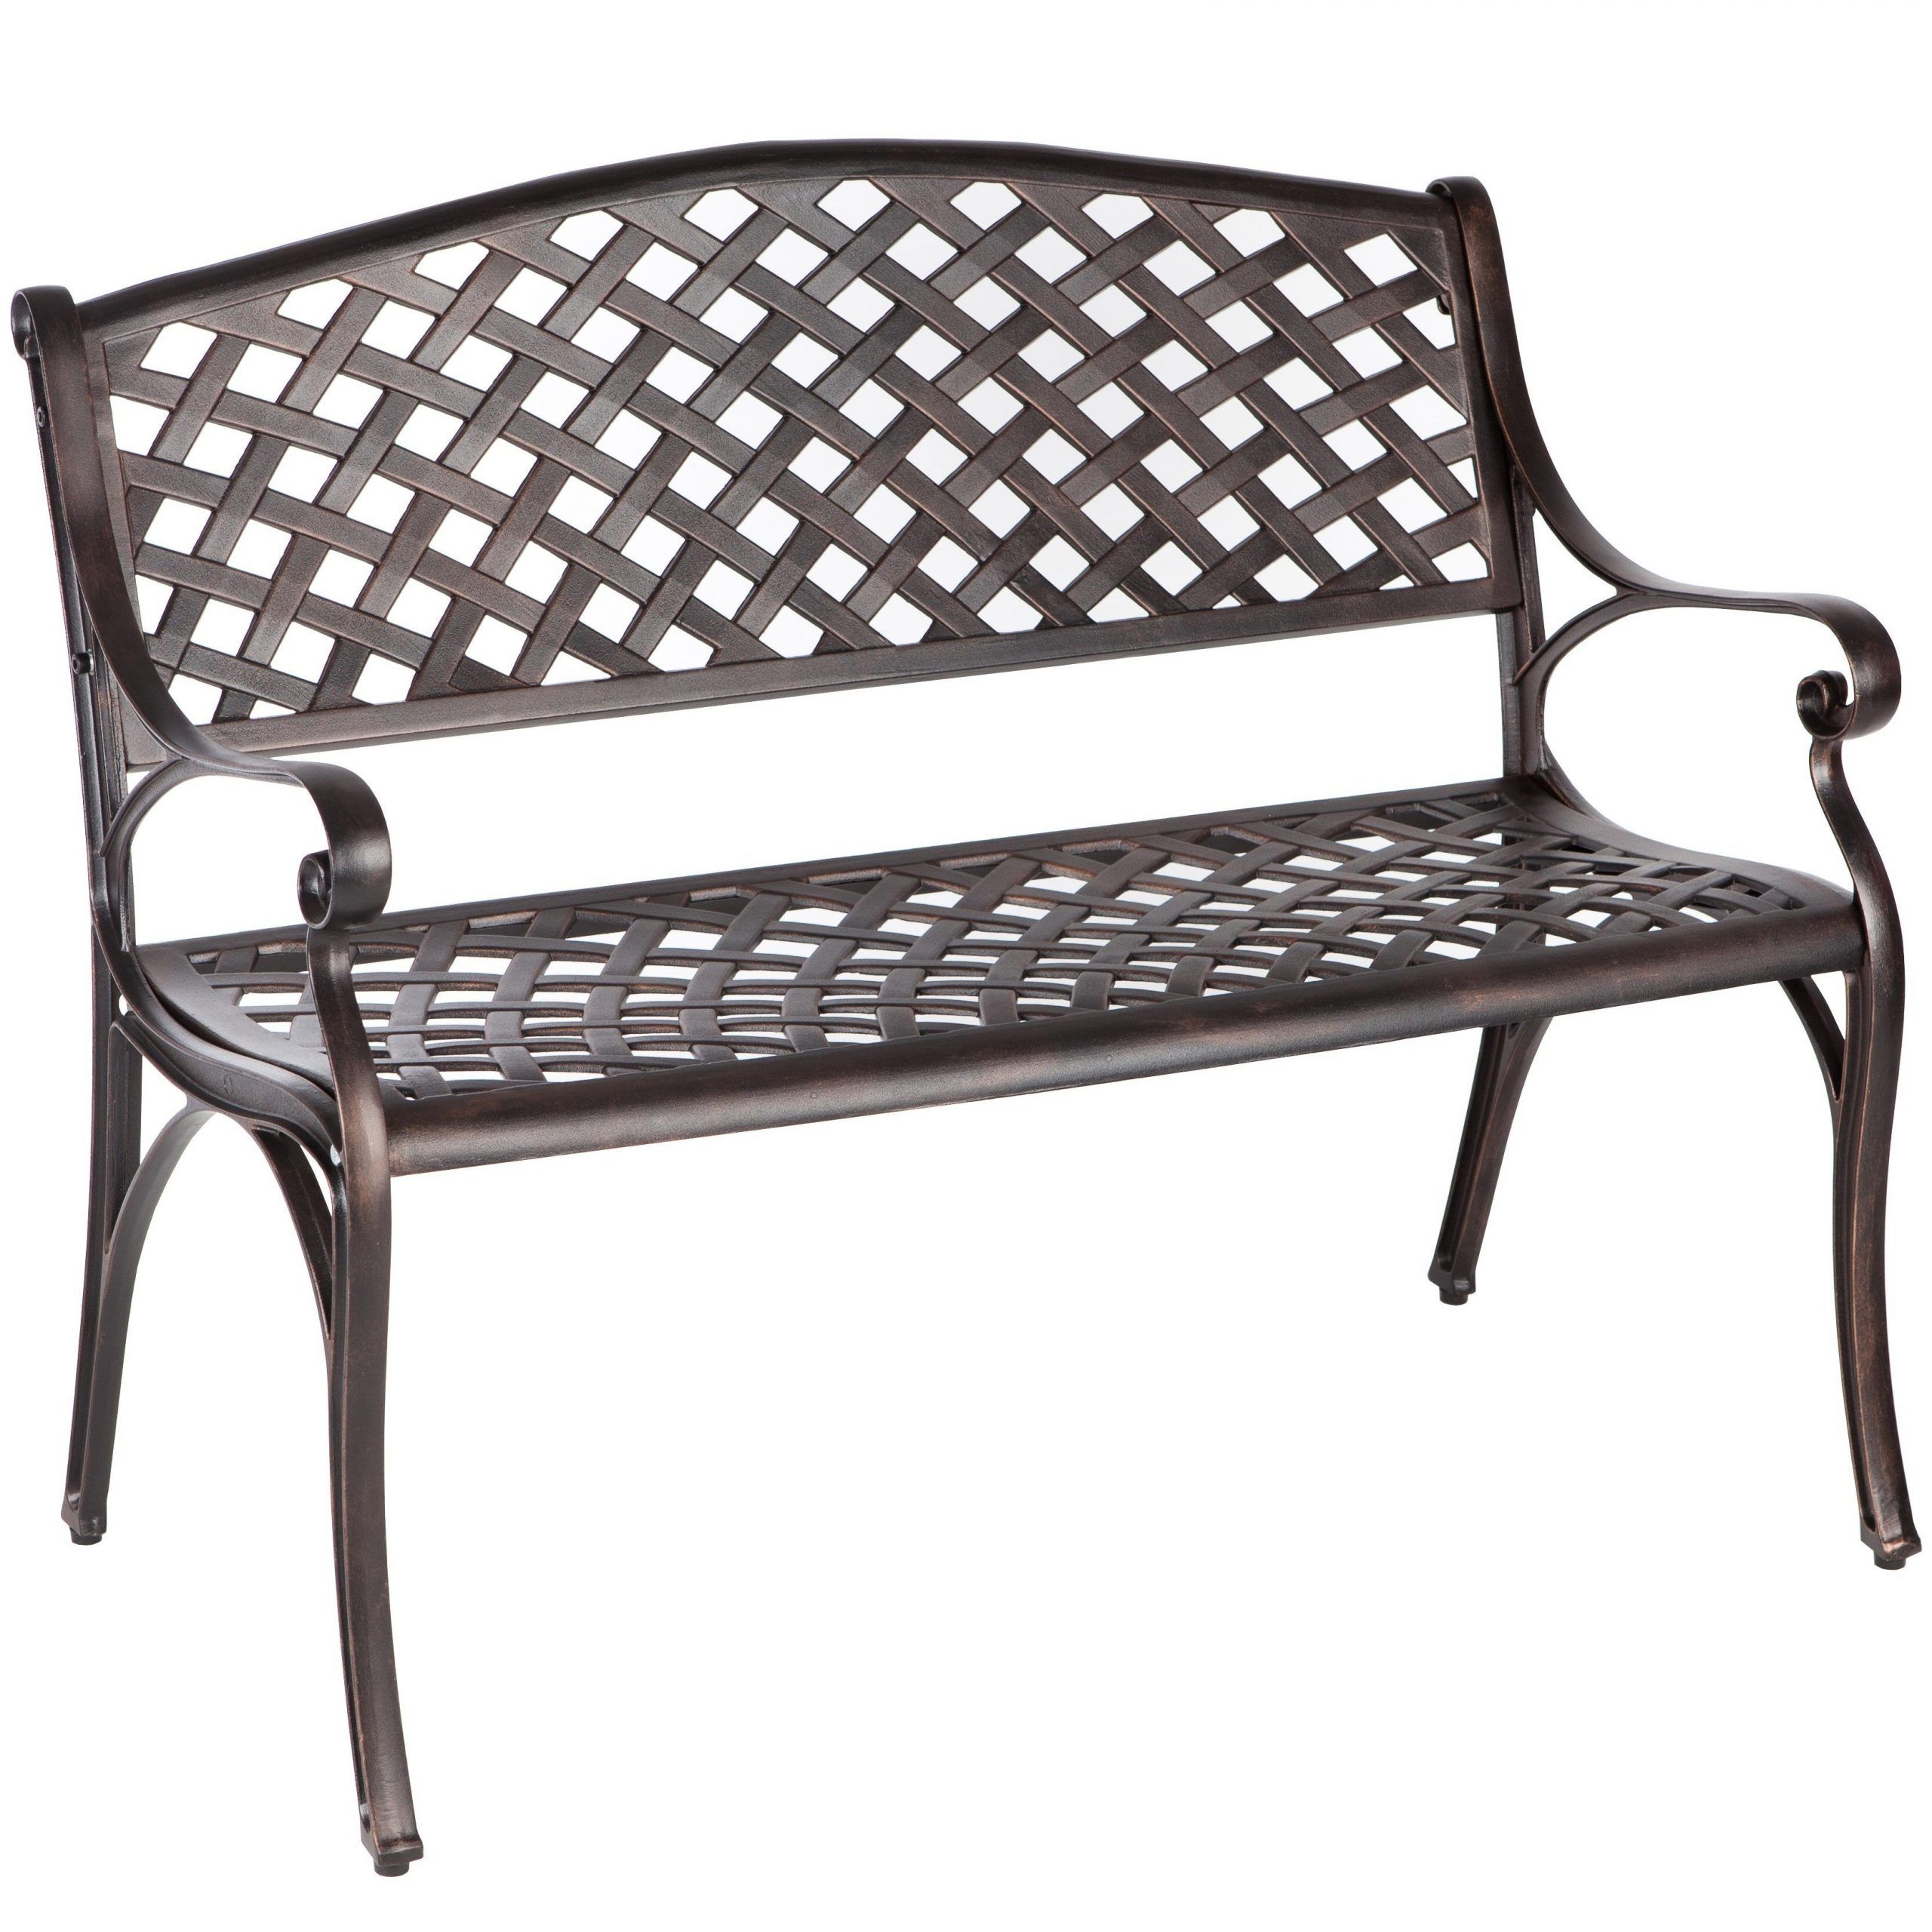 Patio Chairs, Swings & Benches Yard, Garden & Outdoor Living Intended For 2 Person Antique Black Iron Outdoor Swings (Photo 19 of 25)